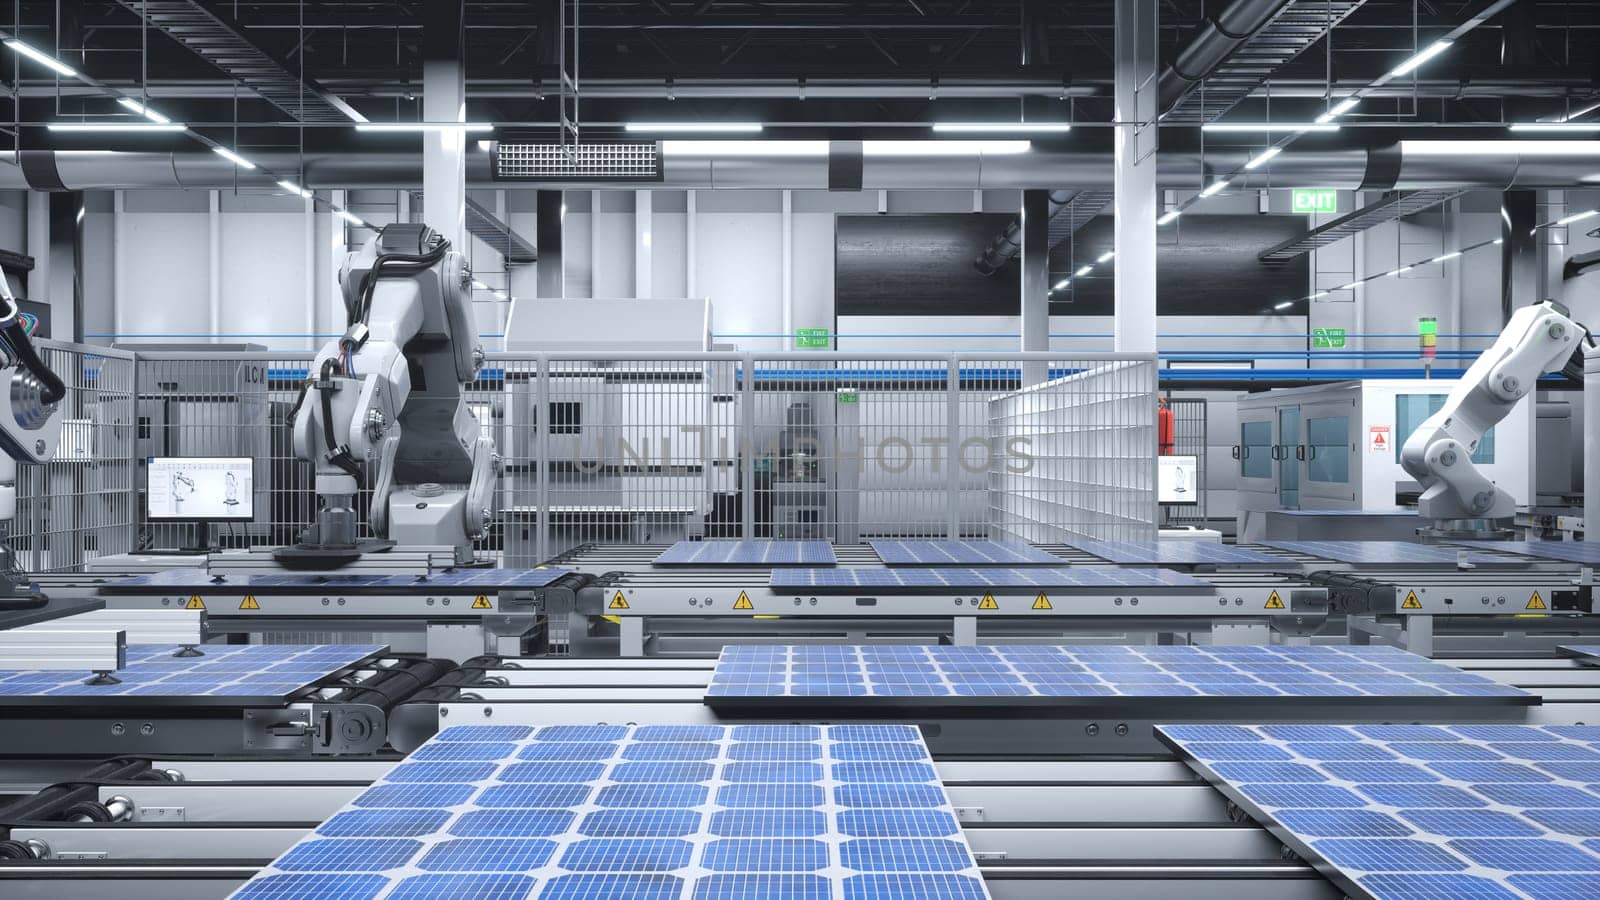 Industrial robot arms placing solar panels on large production line in modern green technology factory. Photovoltaics being assembled on conveyor belts inside facility with safety protocols, 3D render